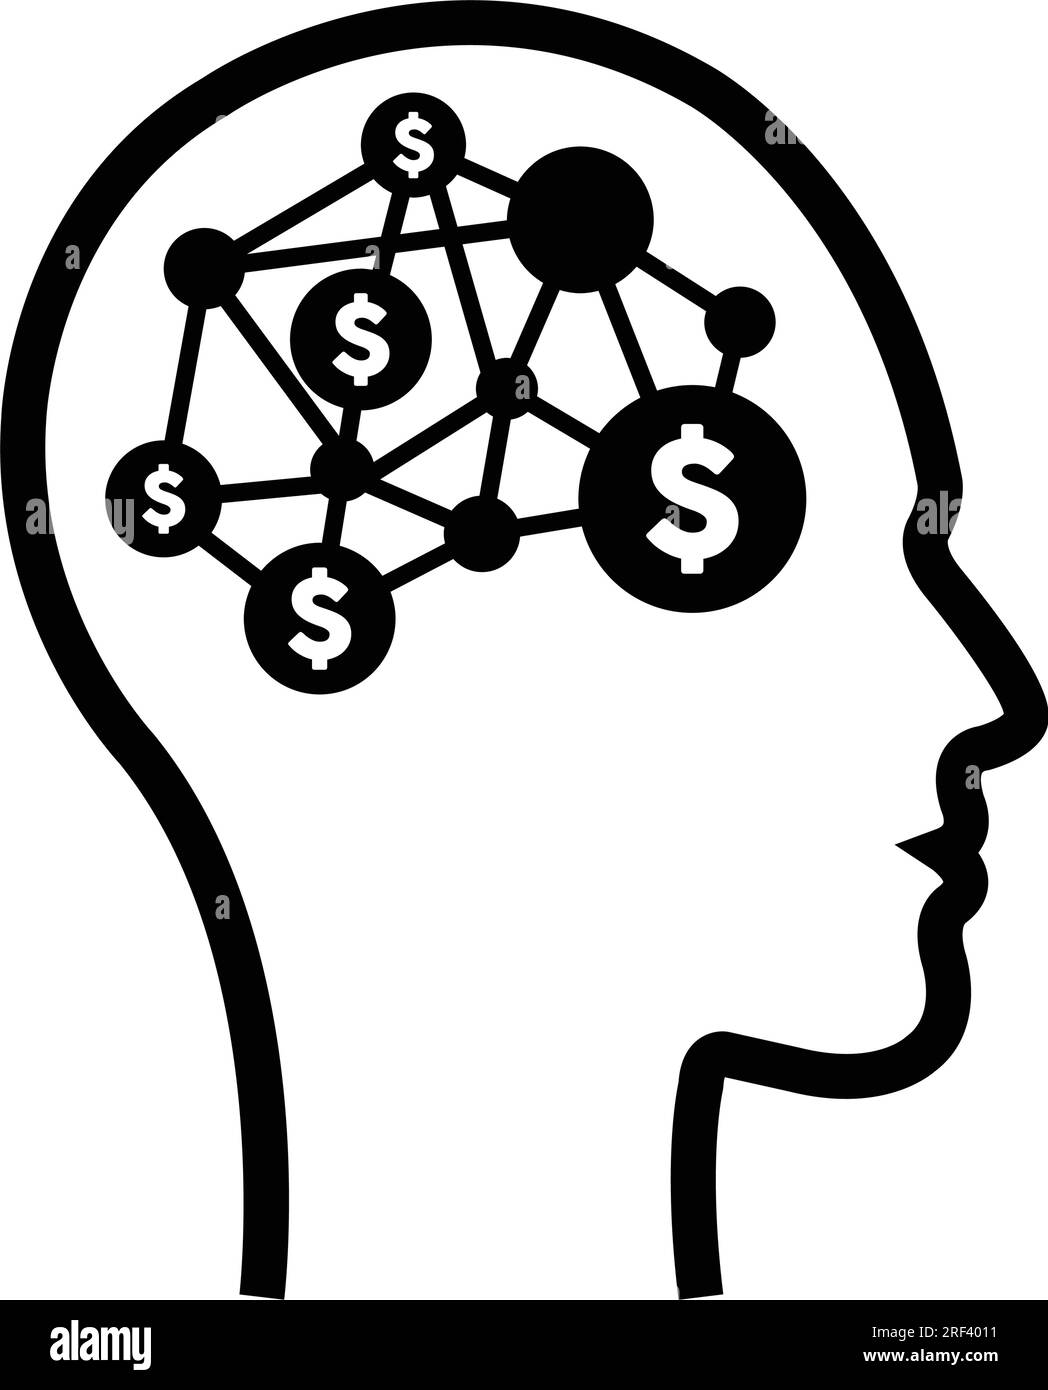 This is a digital dollar symbol on a futuristic human profile face with a brain chip implant for an illustration of artificial intelligence finance an Stock Vector